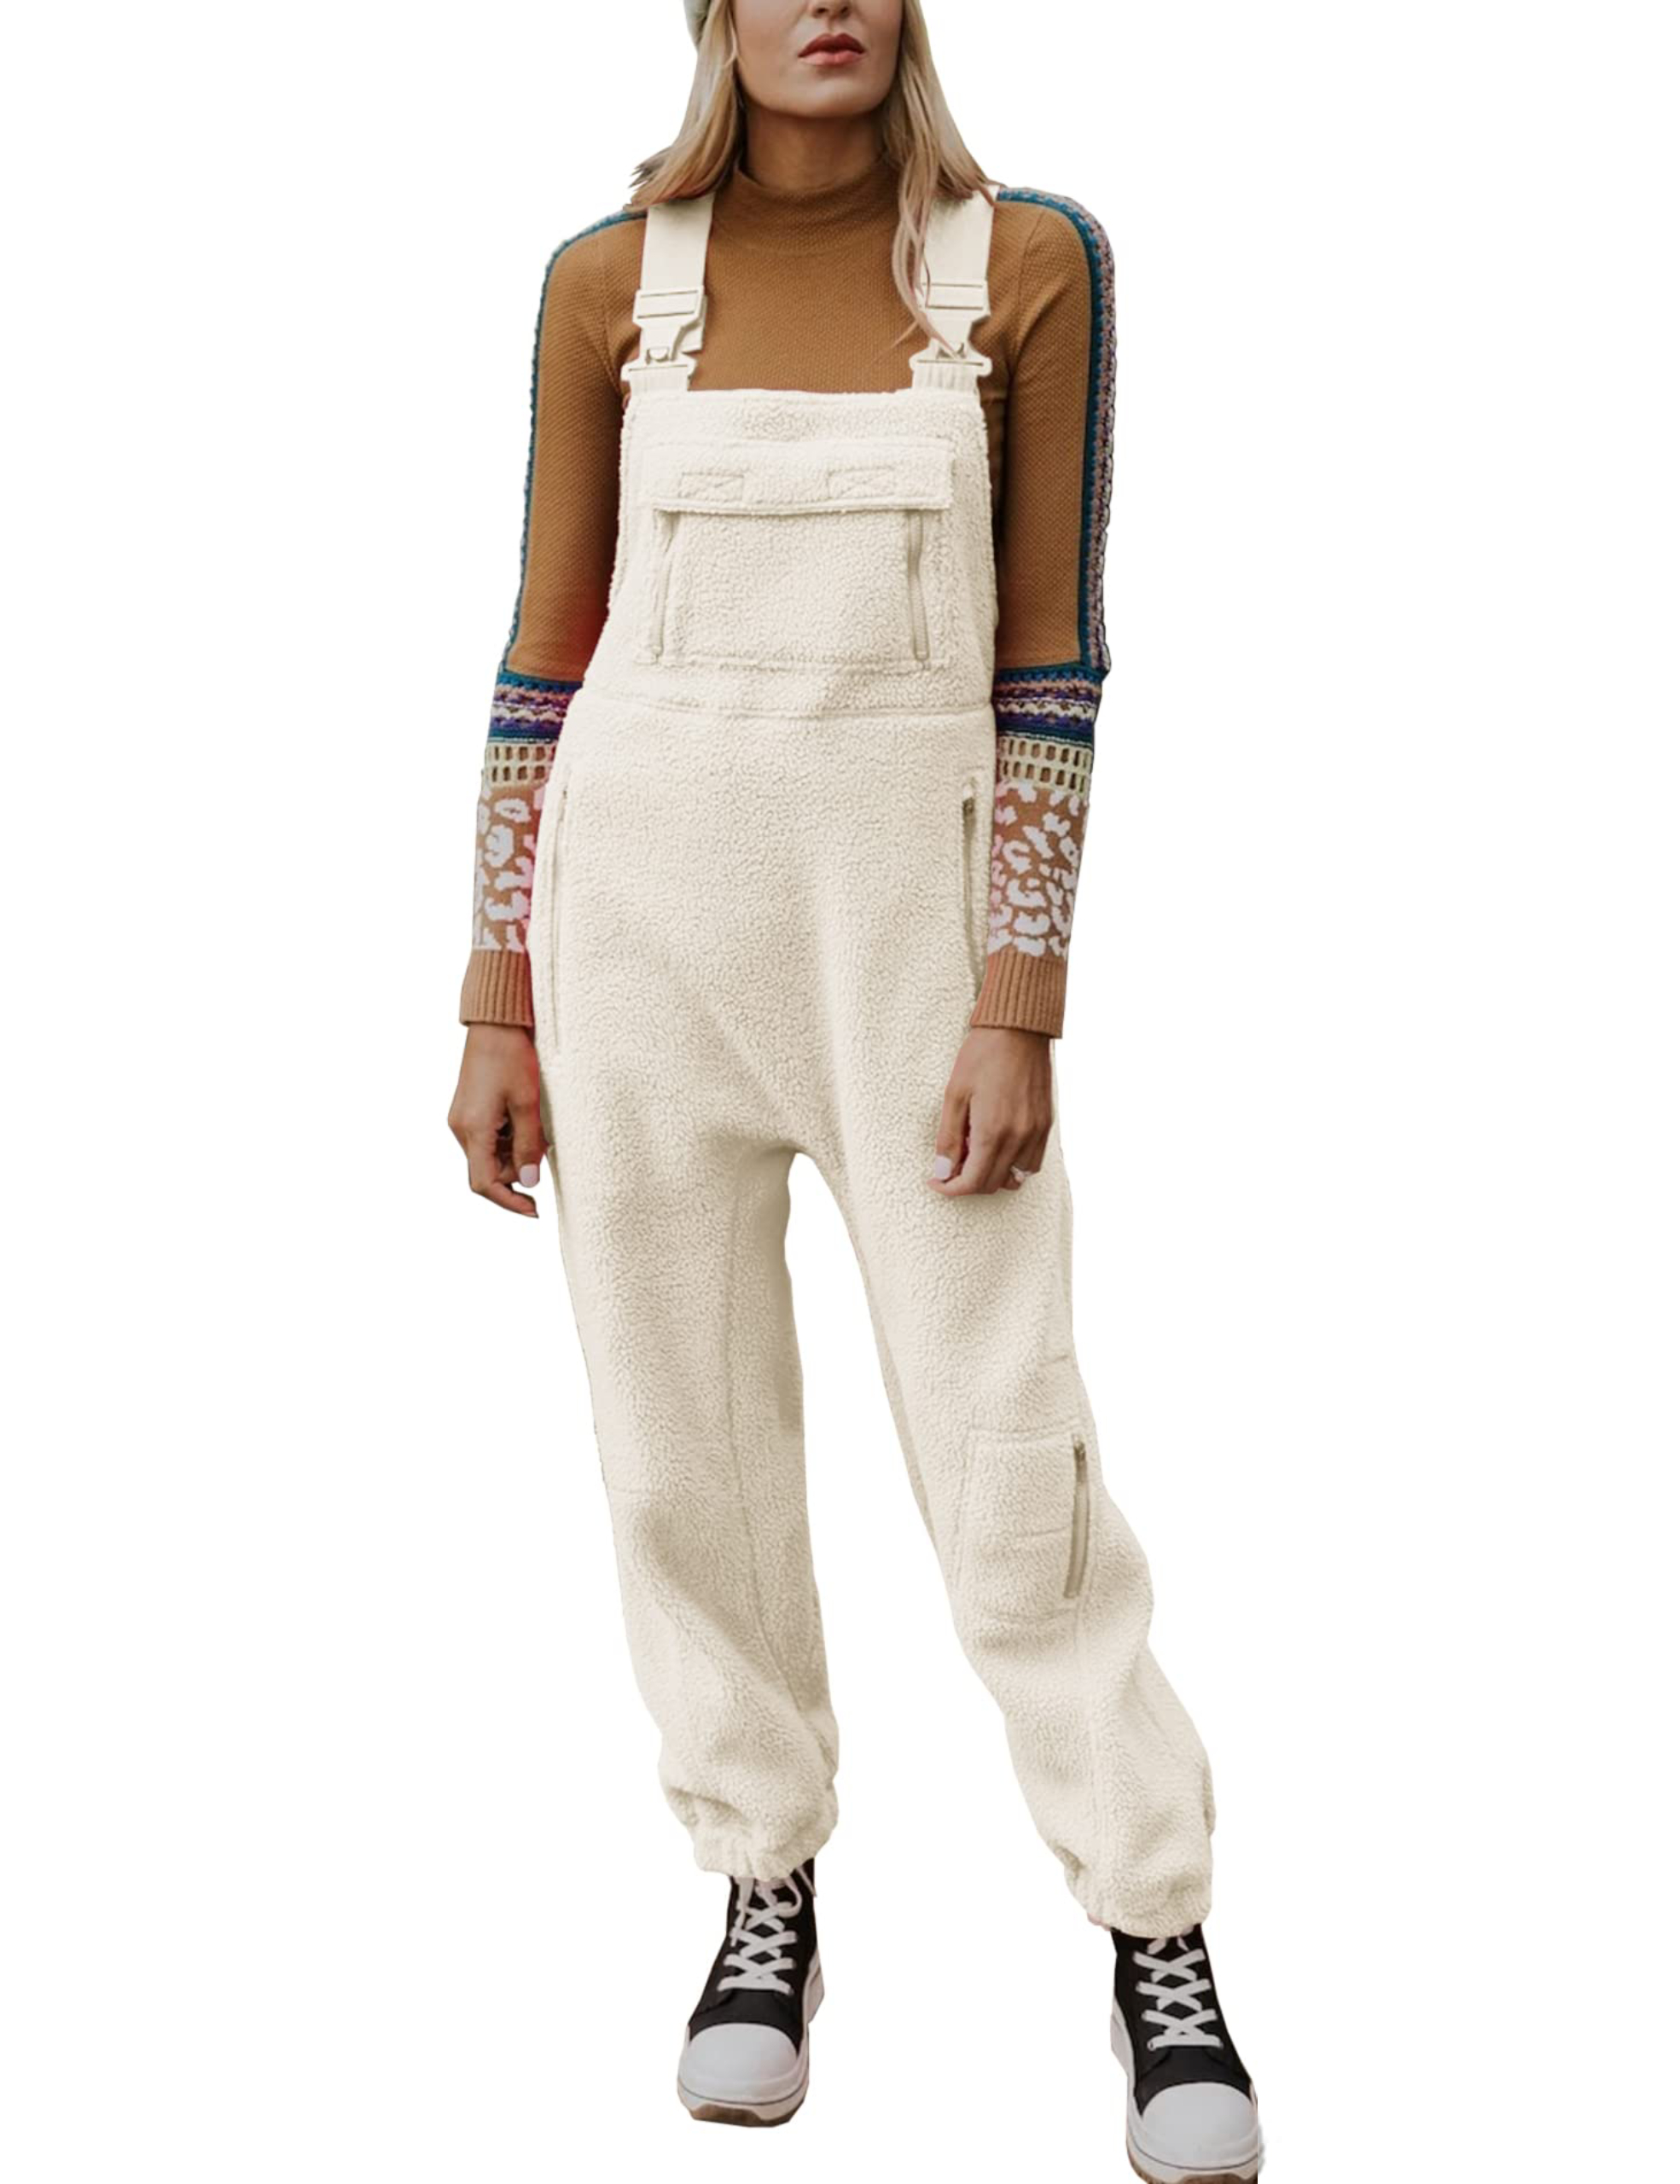 2023 New Women's Fleece Warm Overalls Loose Casual Jumpsuits (Buy 2 Free Shipping)